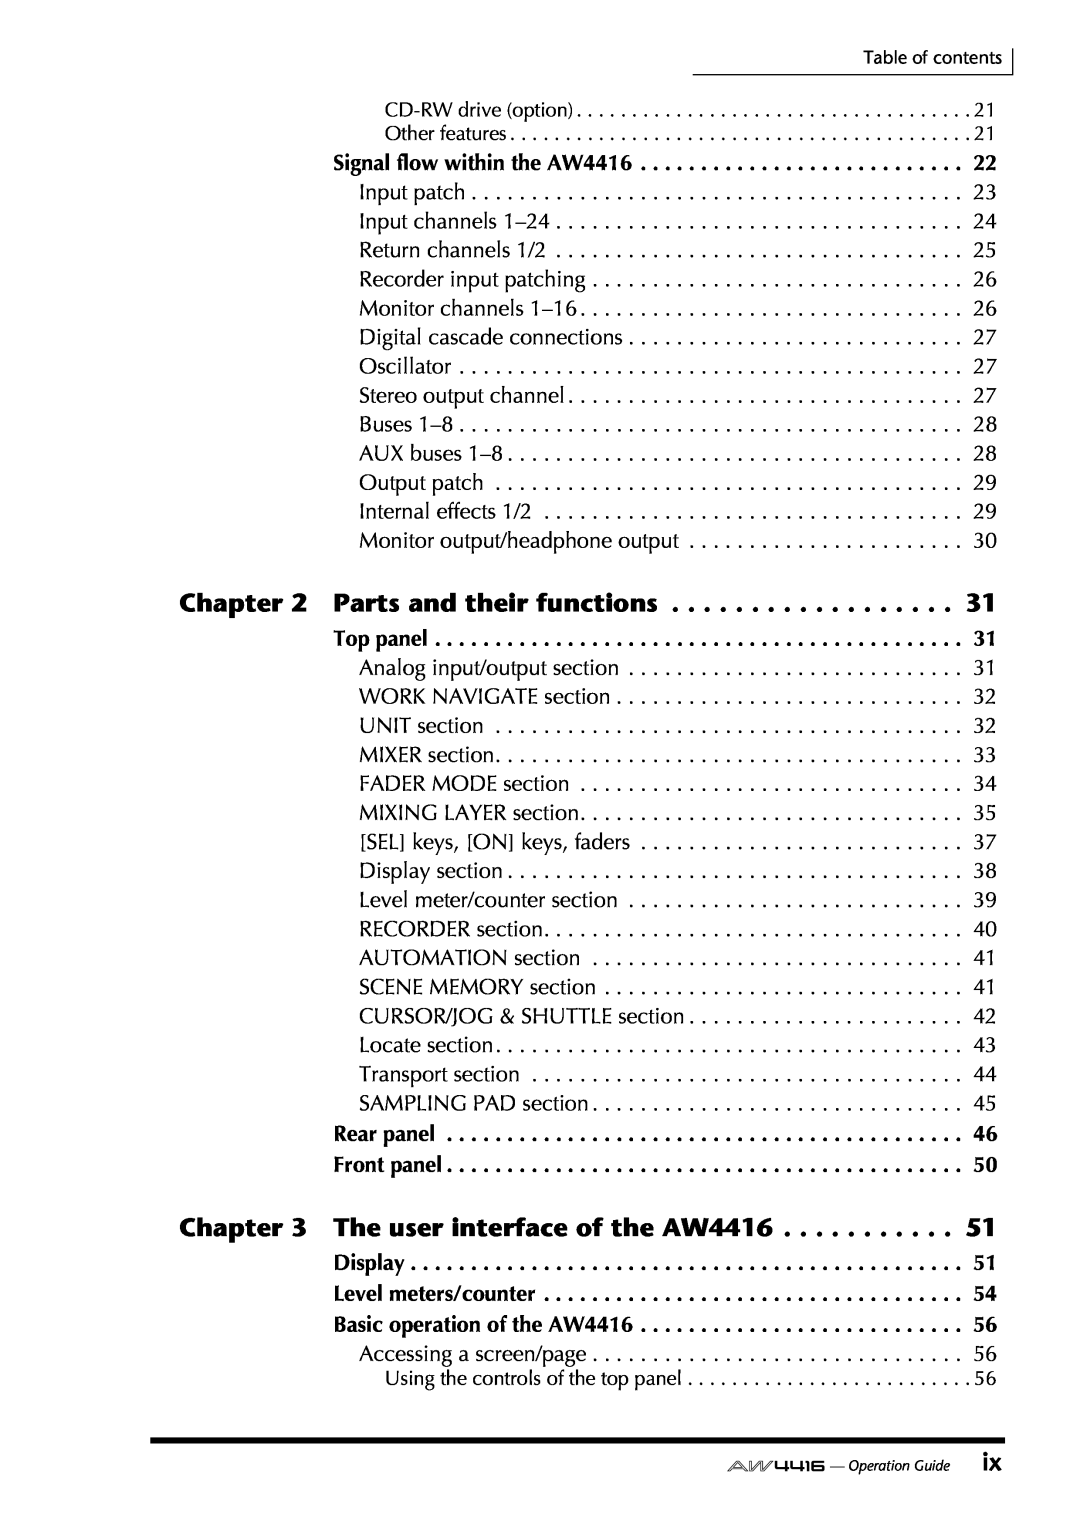 Yamaha AW4416 manual Parts and their functions 